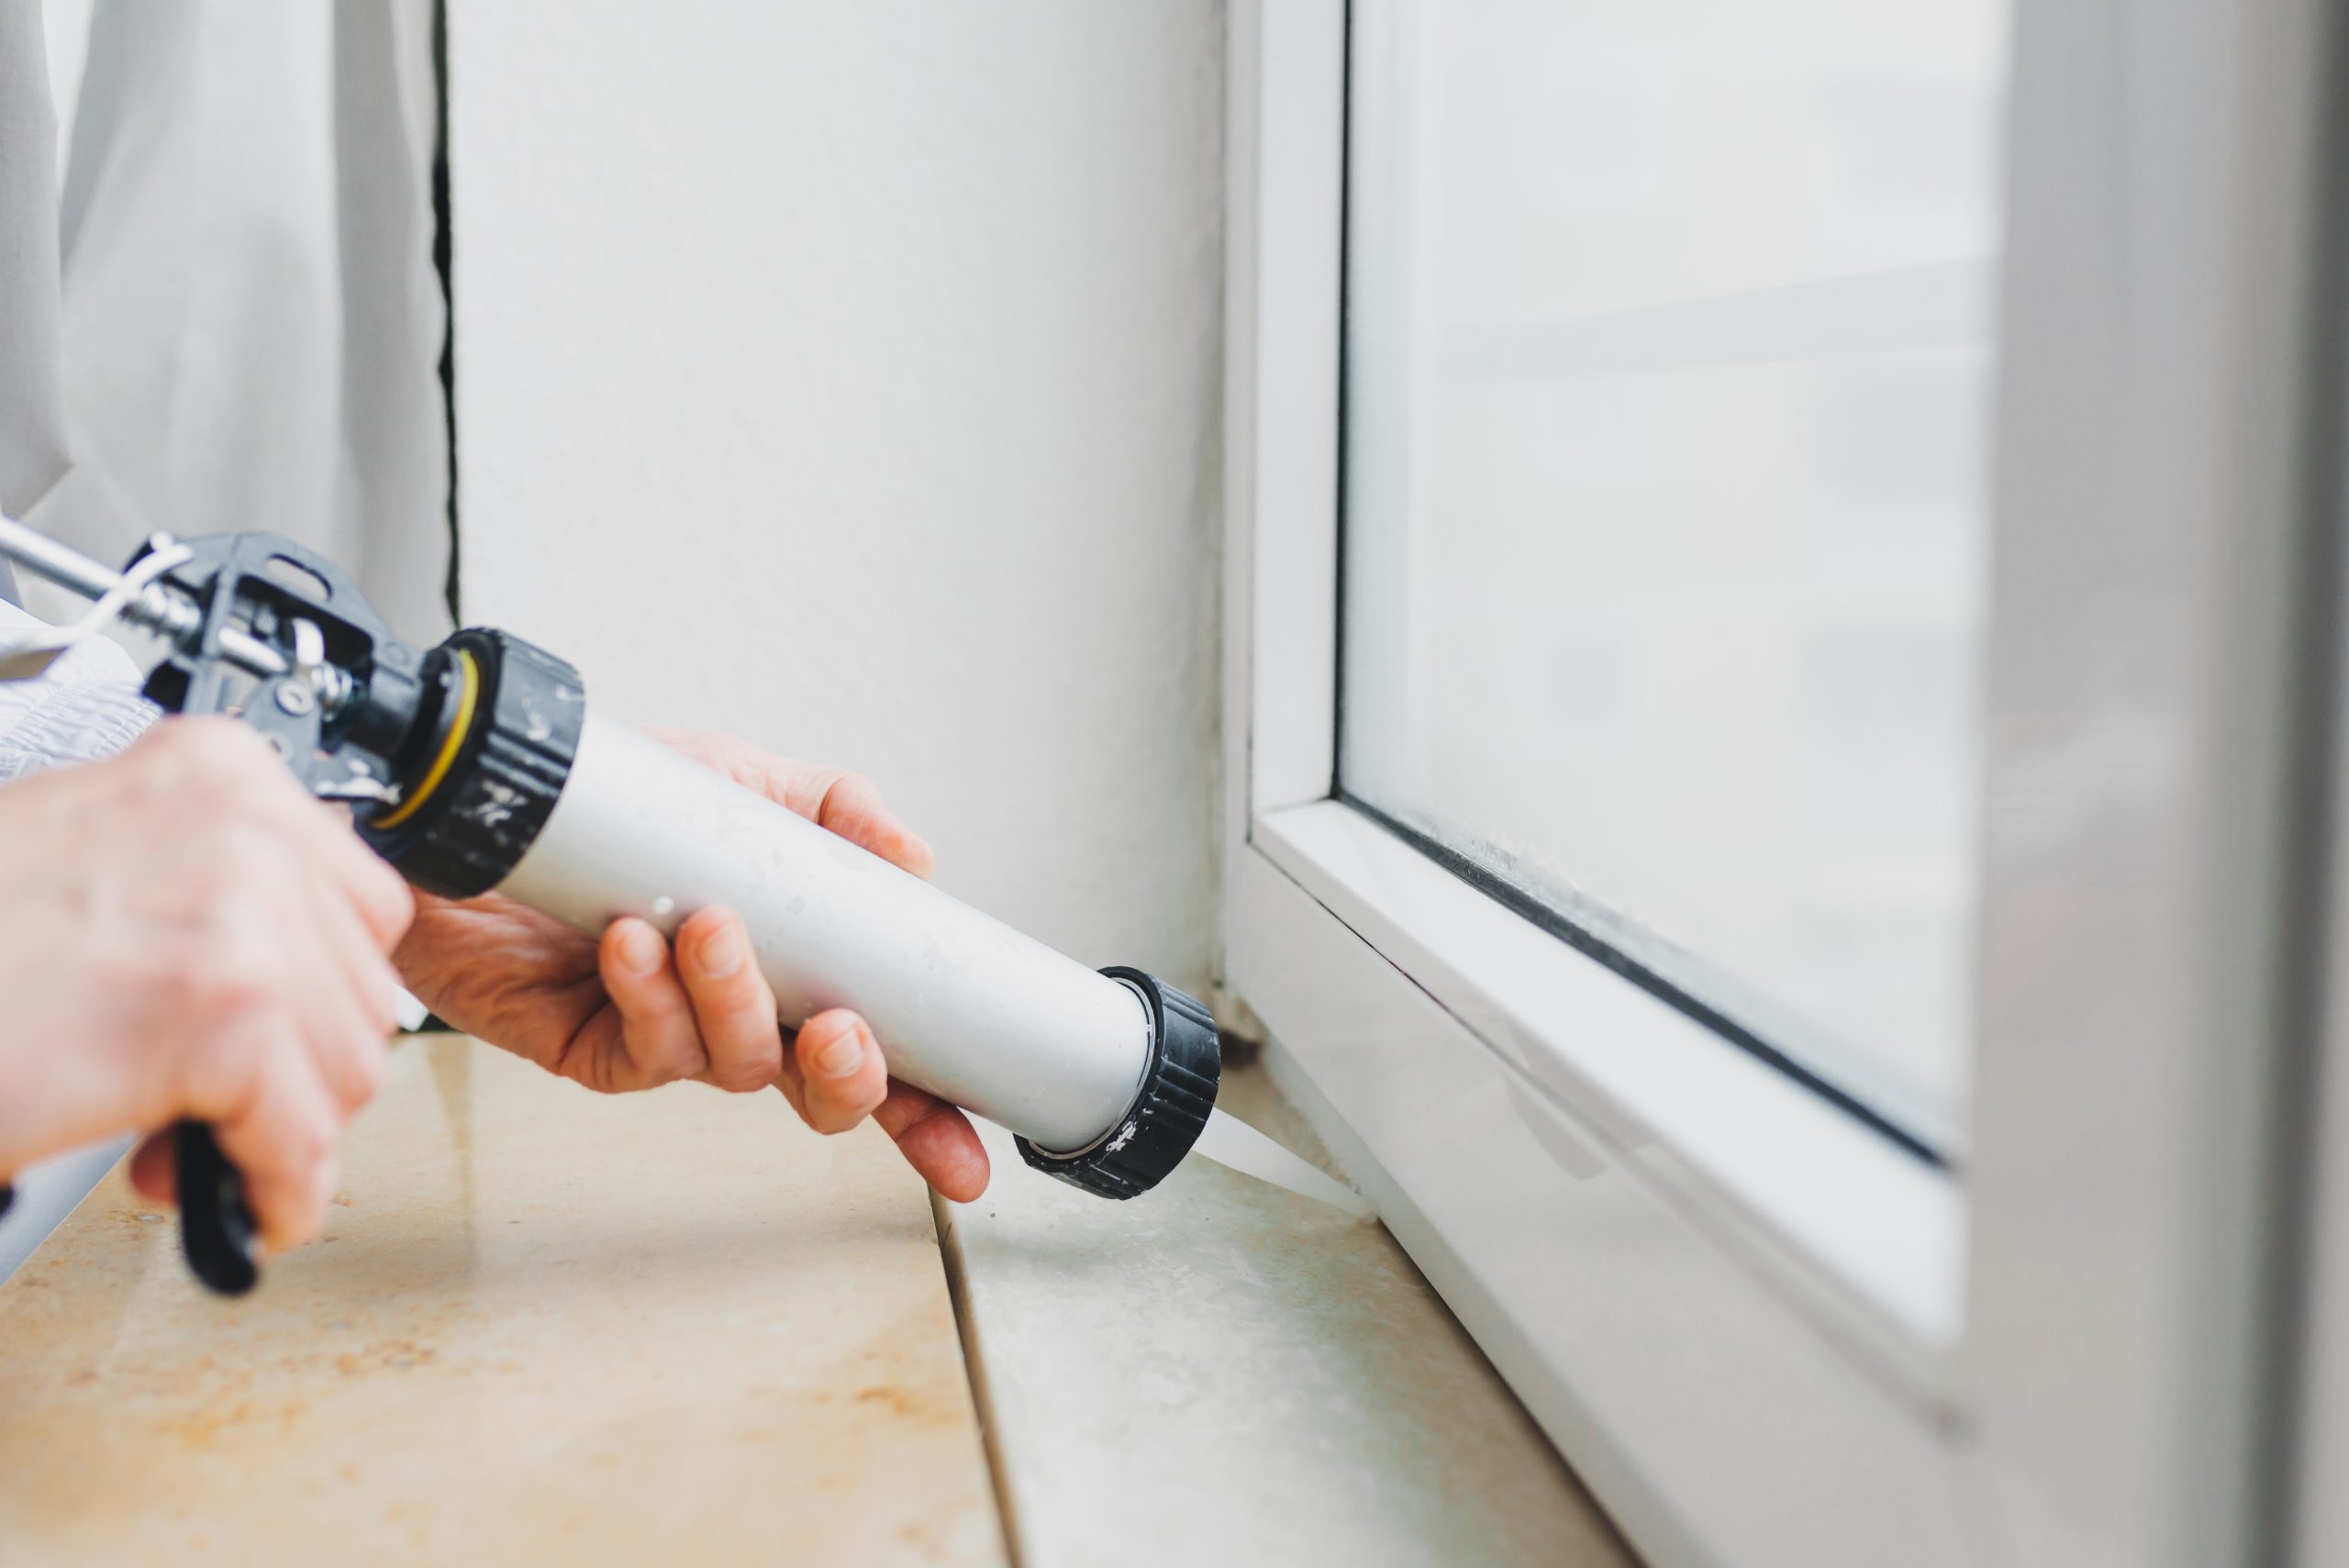 Caulking windows helps to pest proof a home